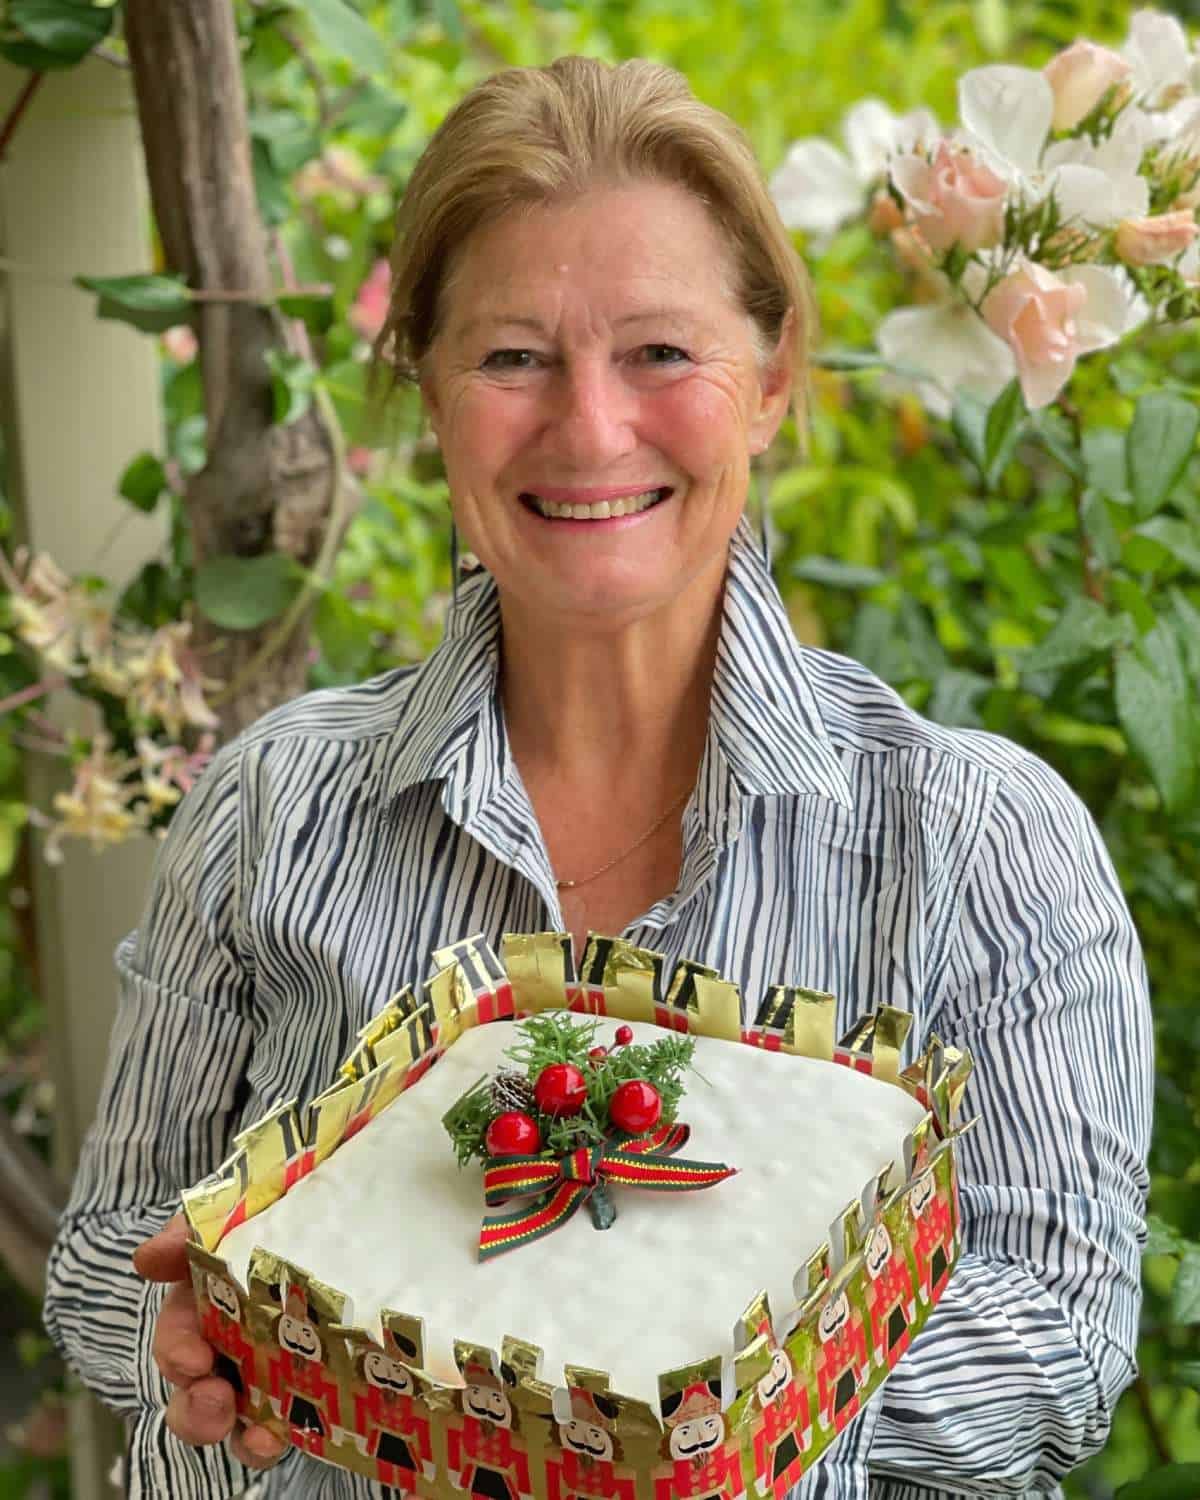 A woman smiling holding a Christmas cake